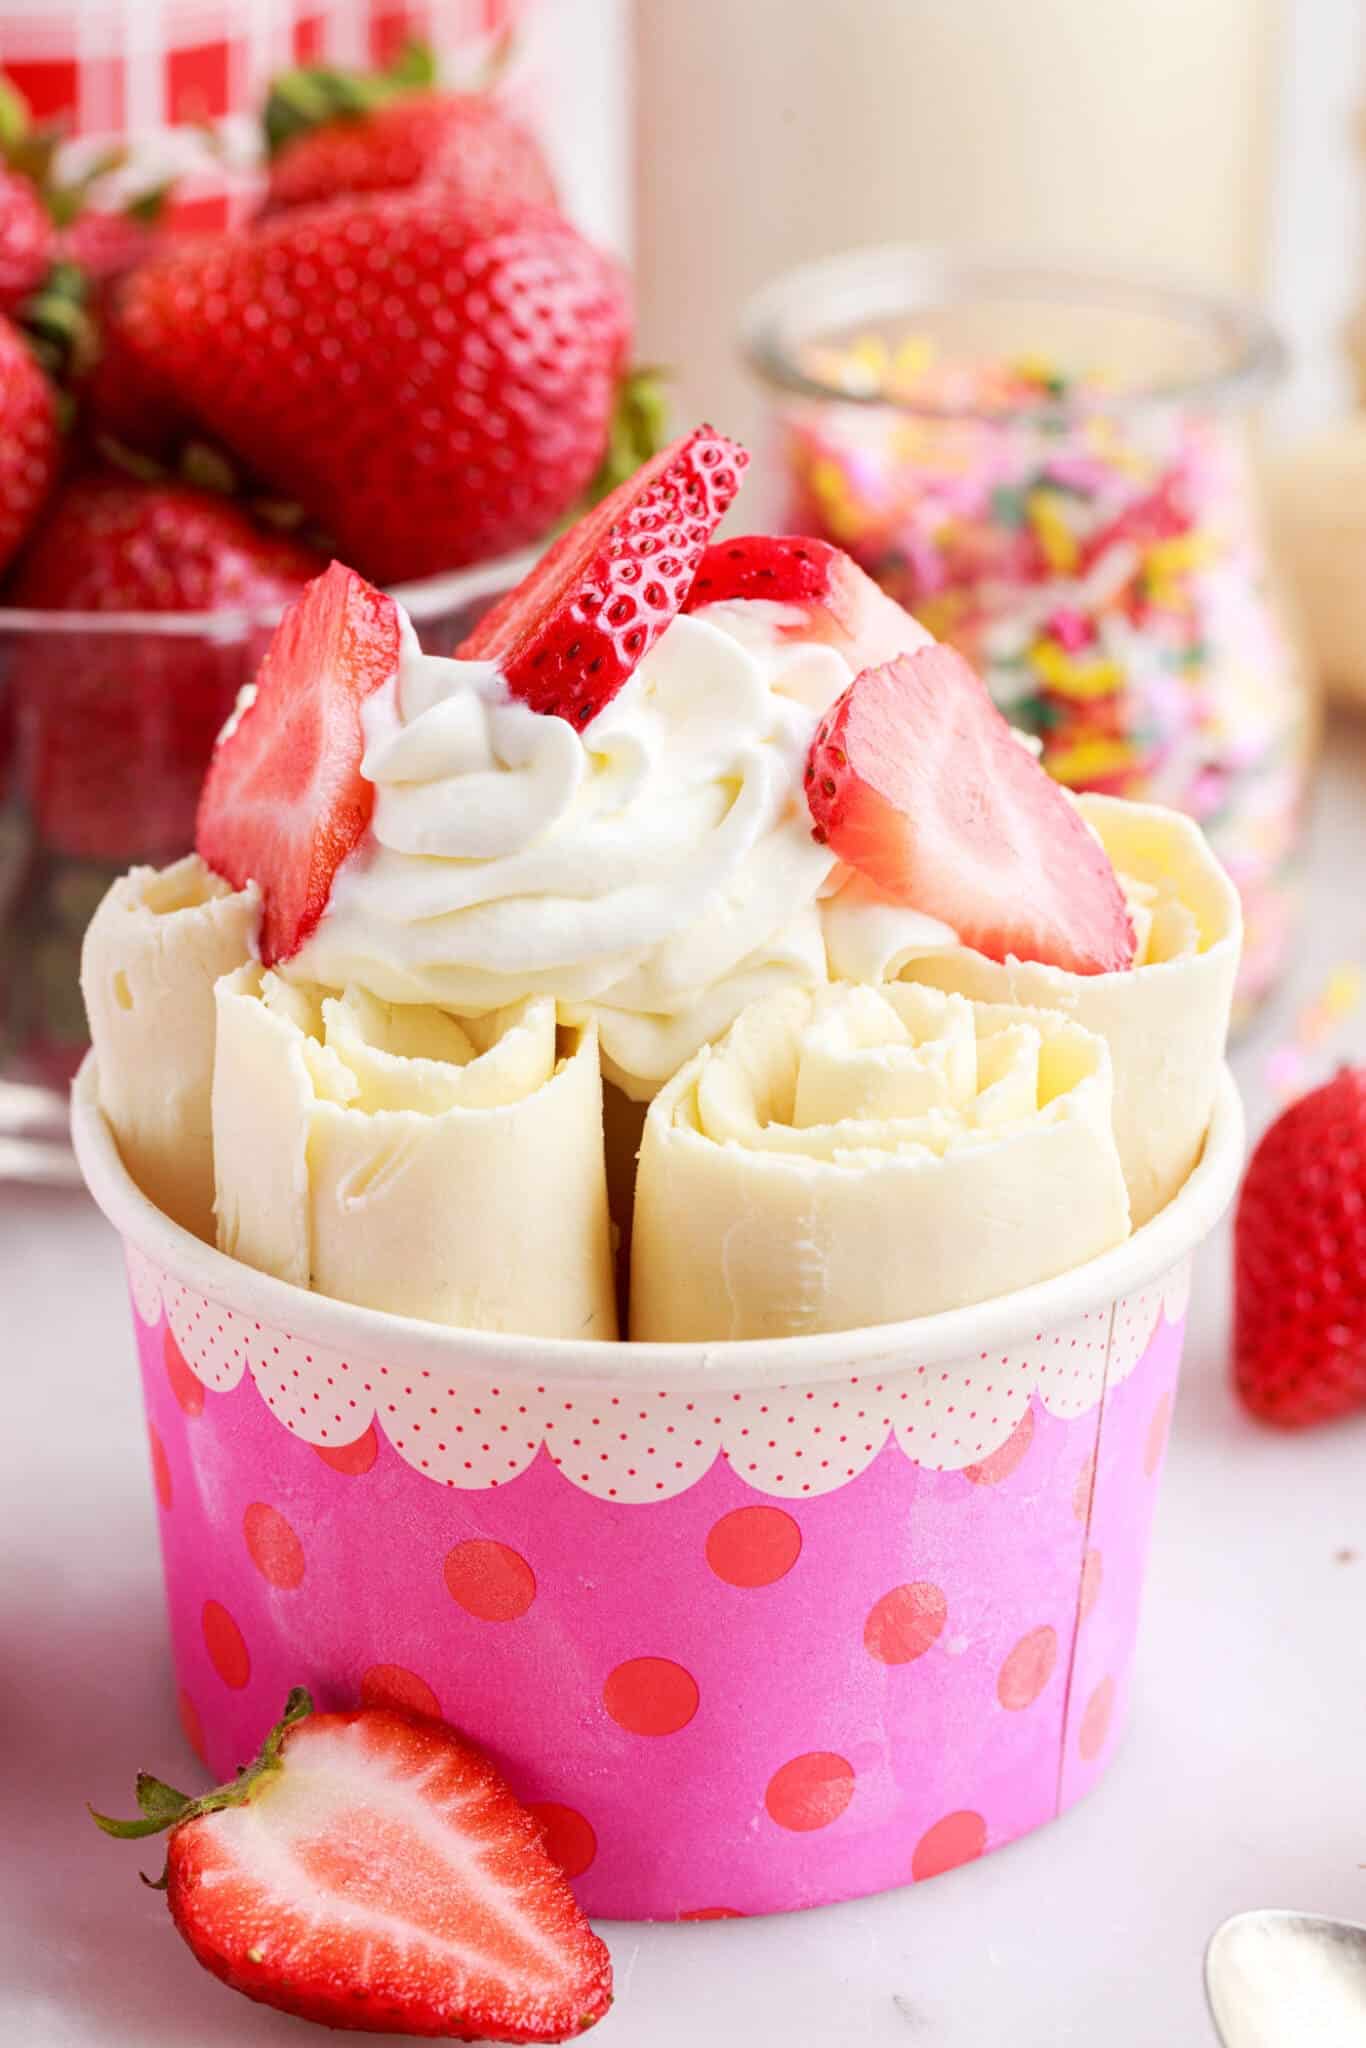 Rolled ice cream with whipped cream and sliced strawberries on top and more strawberries and sprinkles in the background.